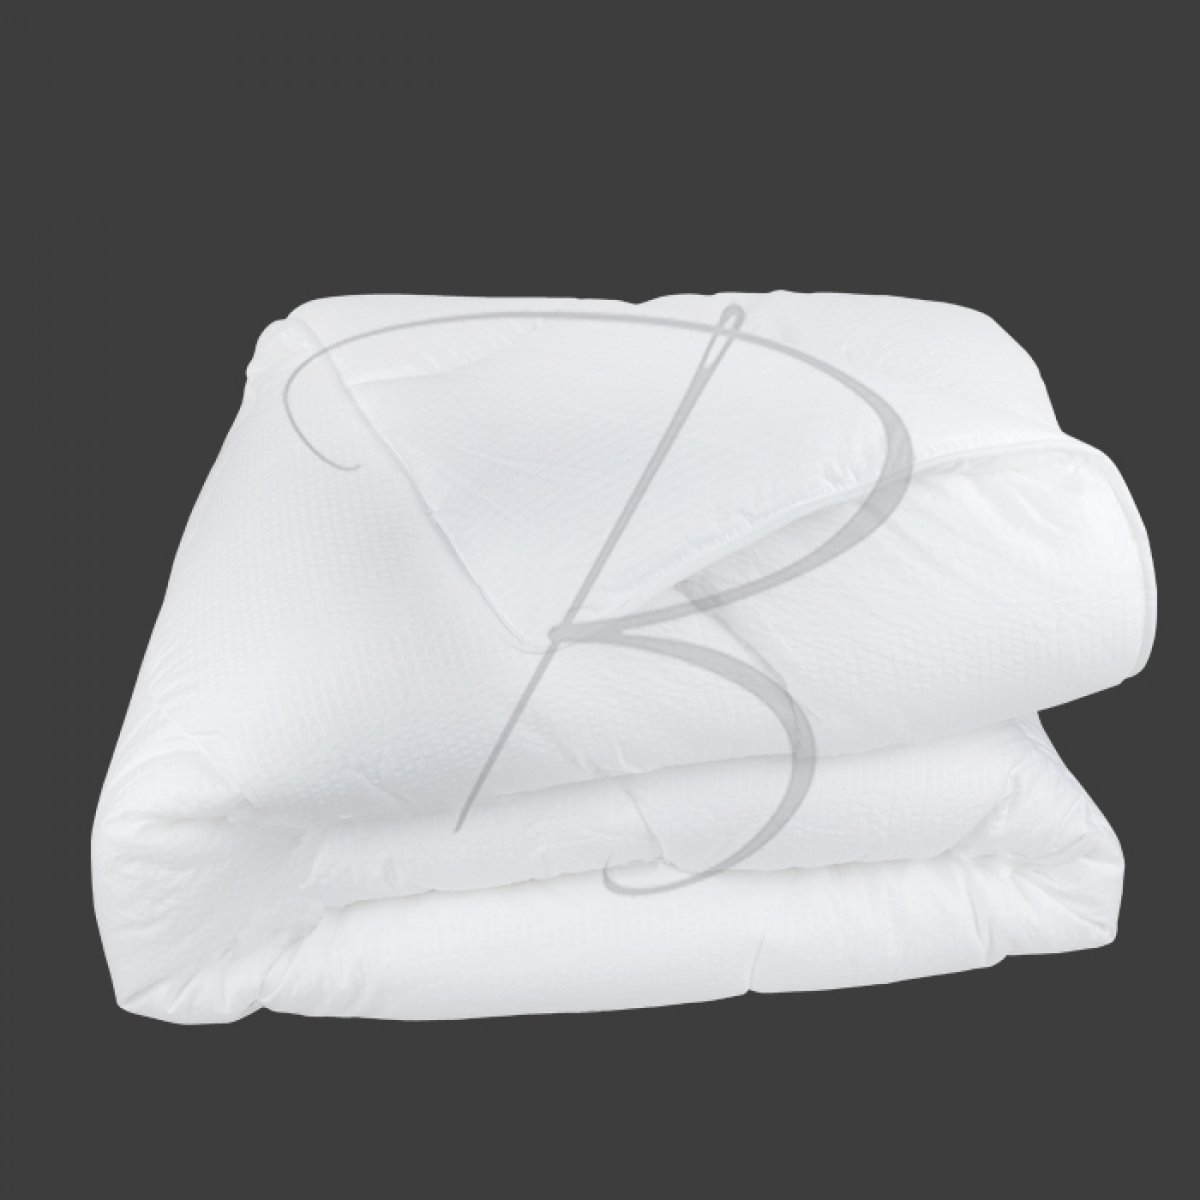 COMETE synthetic comforter - 450g/m² - 140 x 200